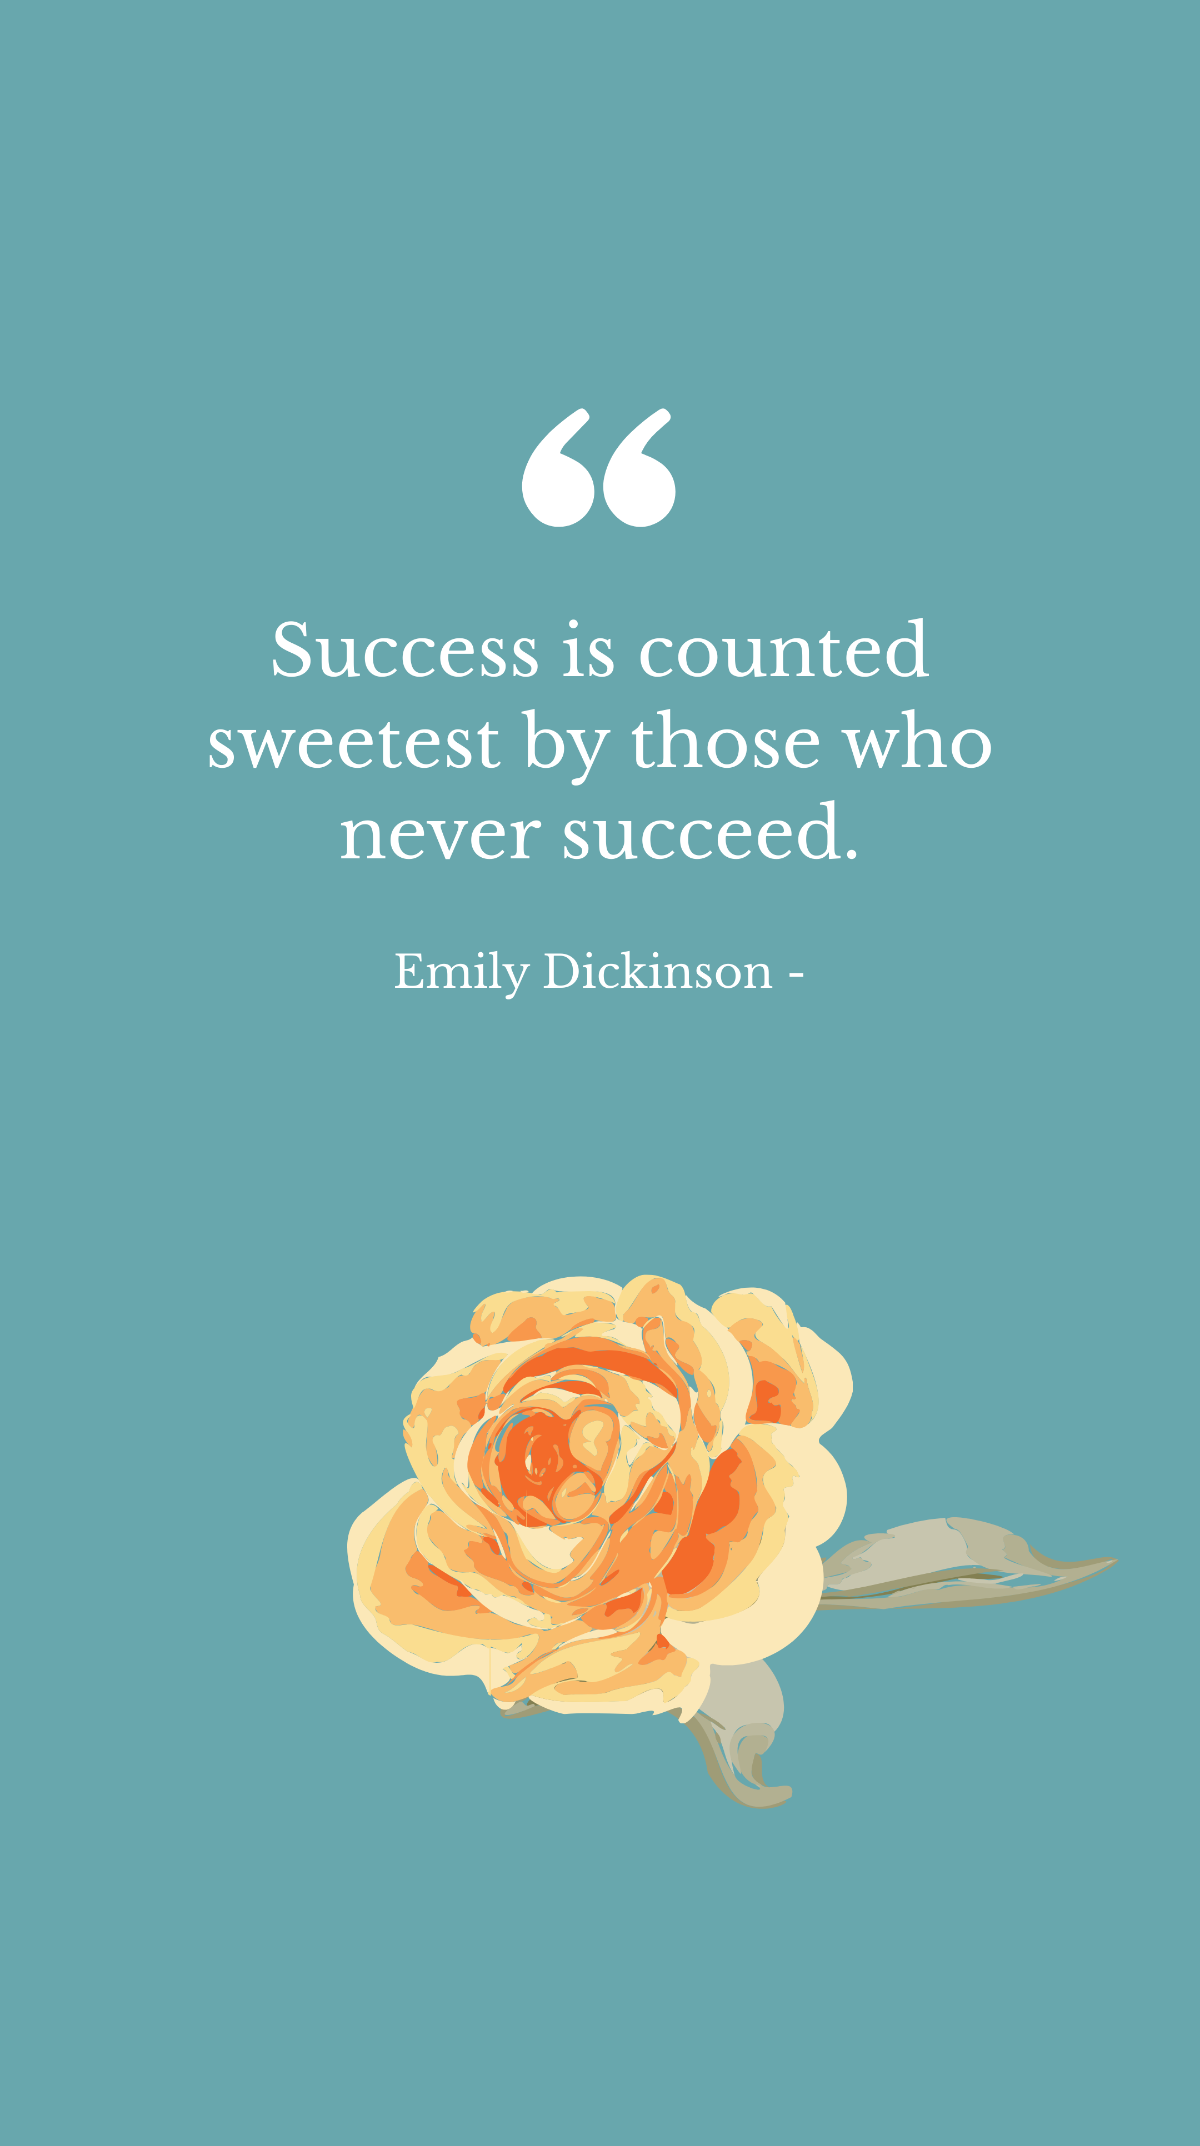 Free Emily Dickinson - Success is counted sweetest by those who never succeed. Template